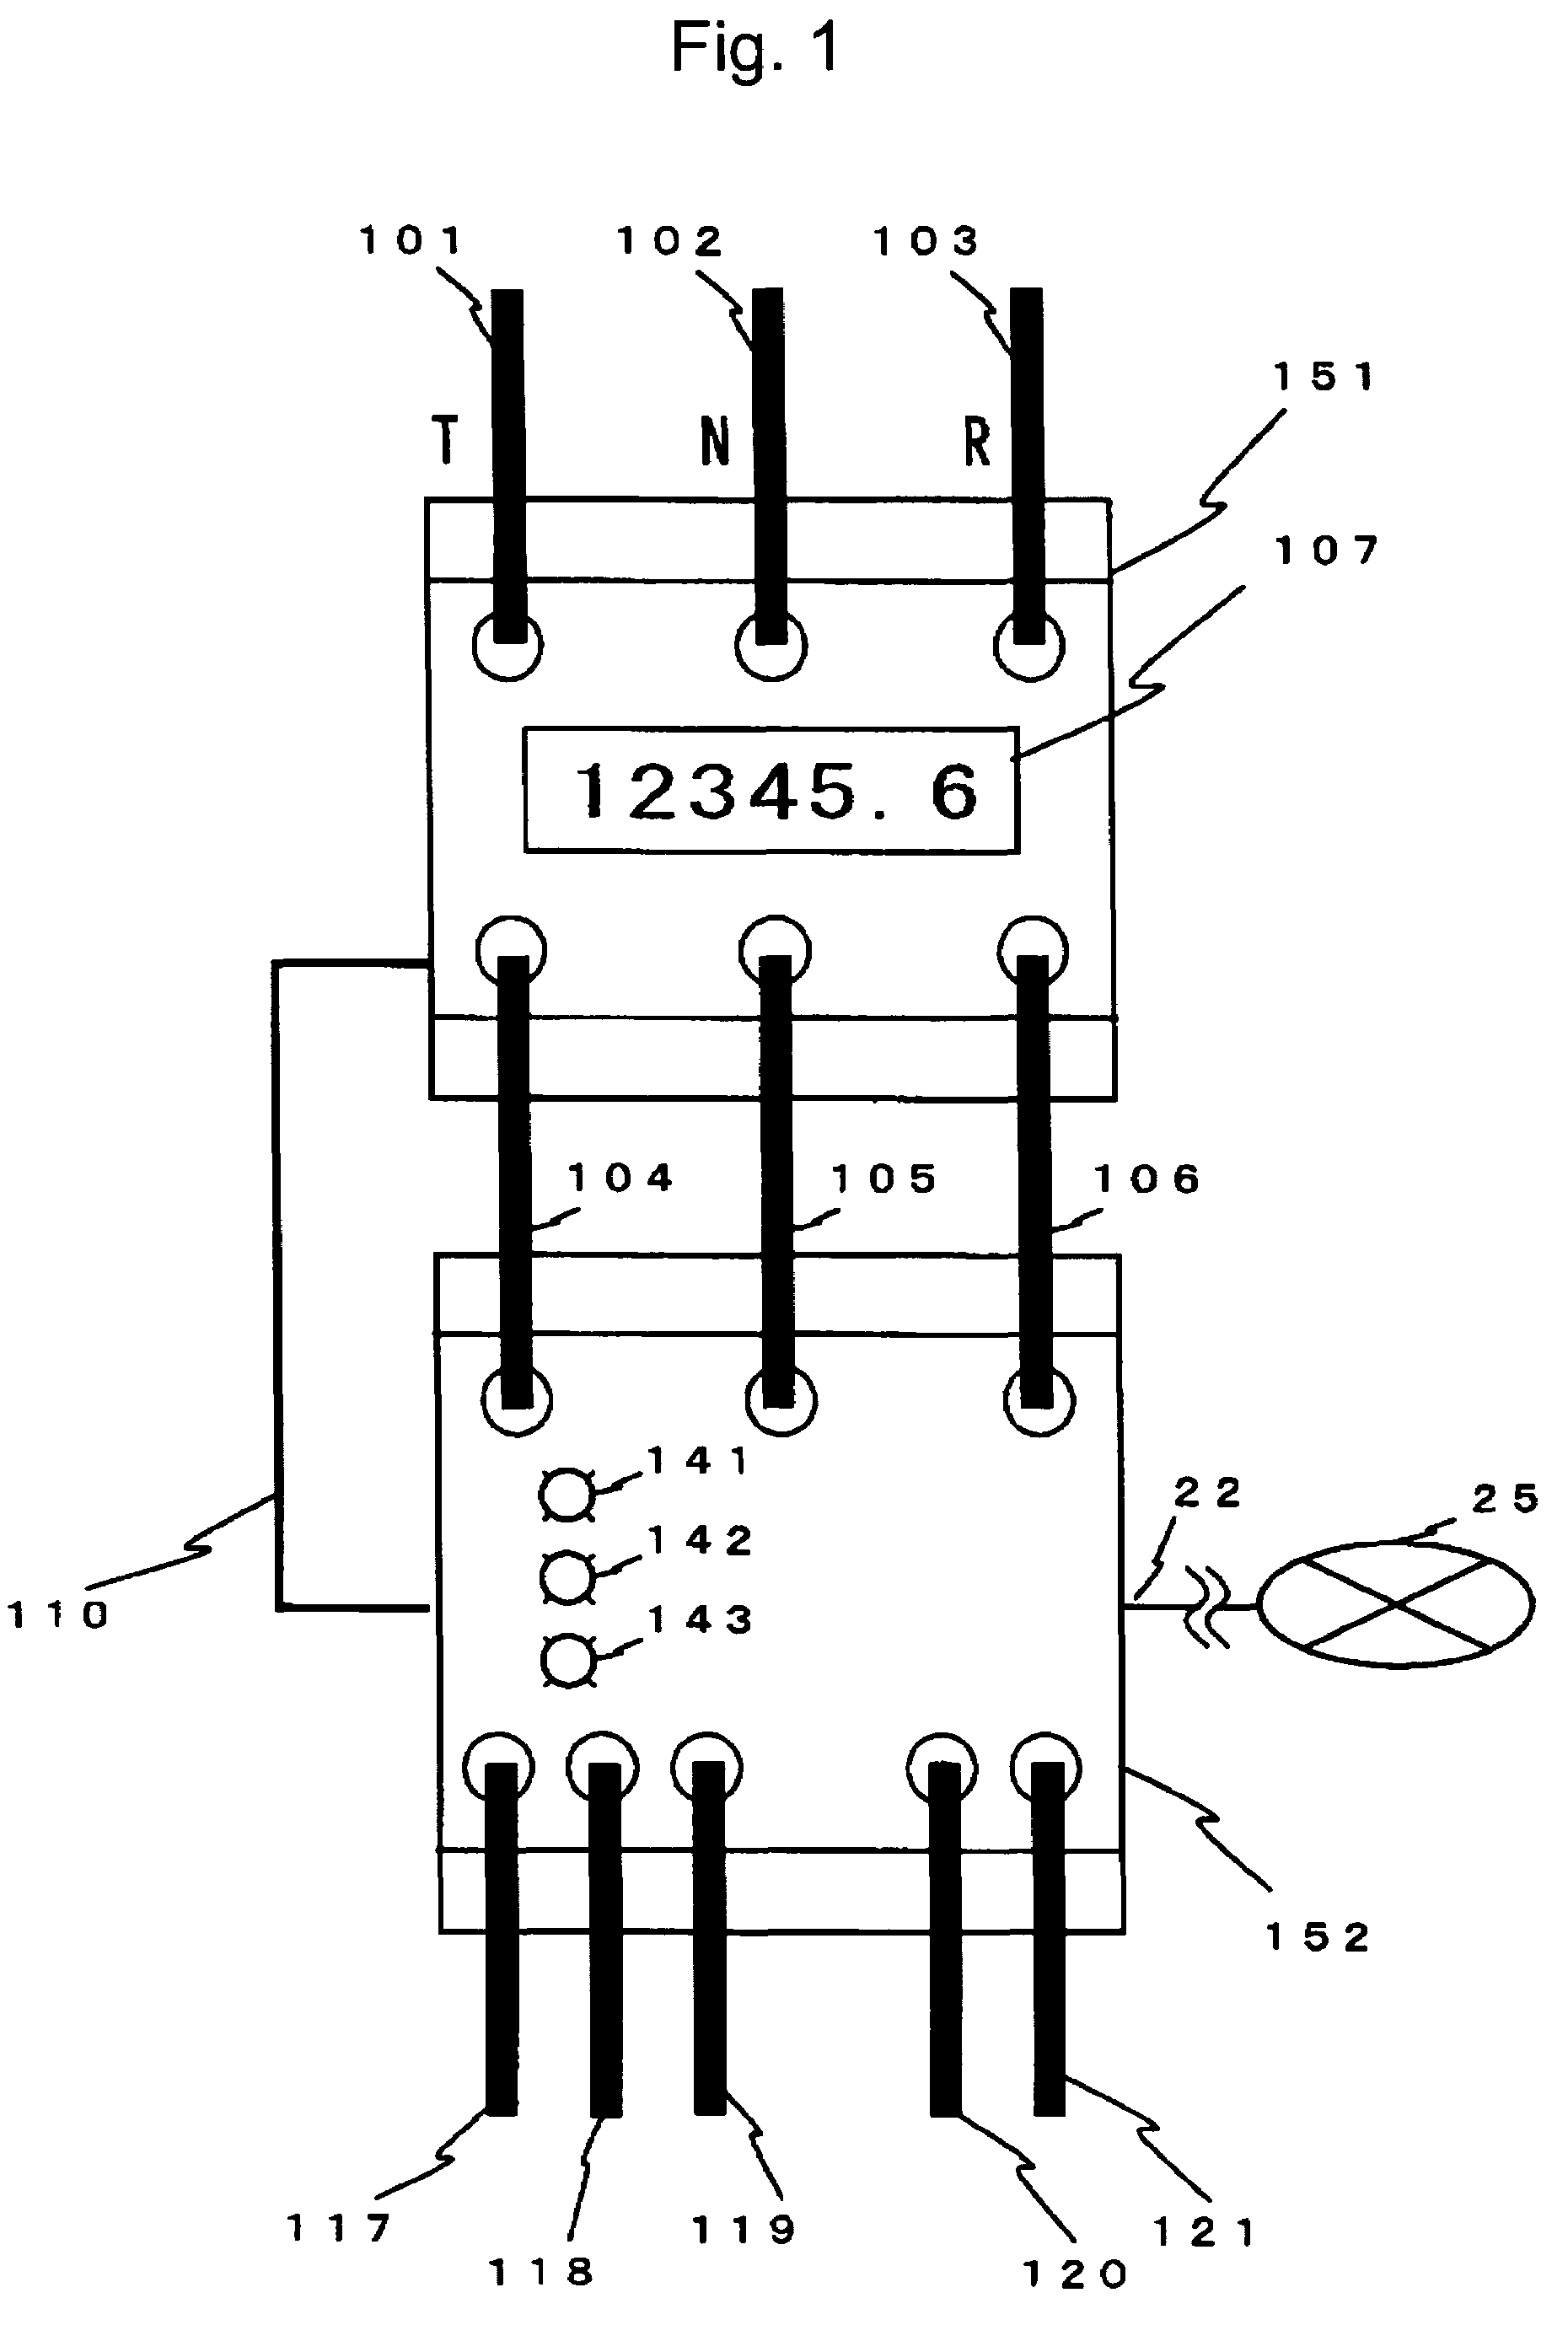 Power consumption measuring device and power control system